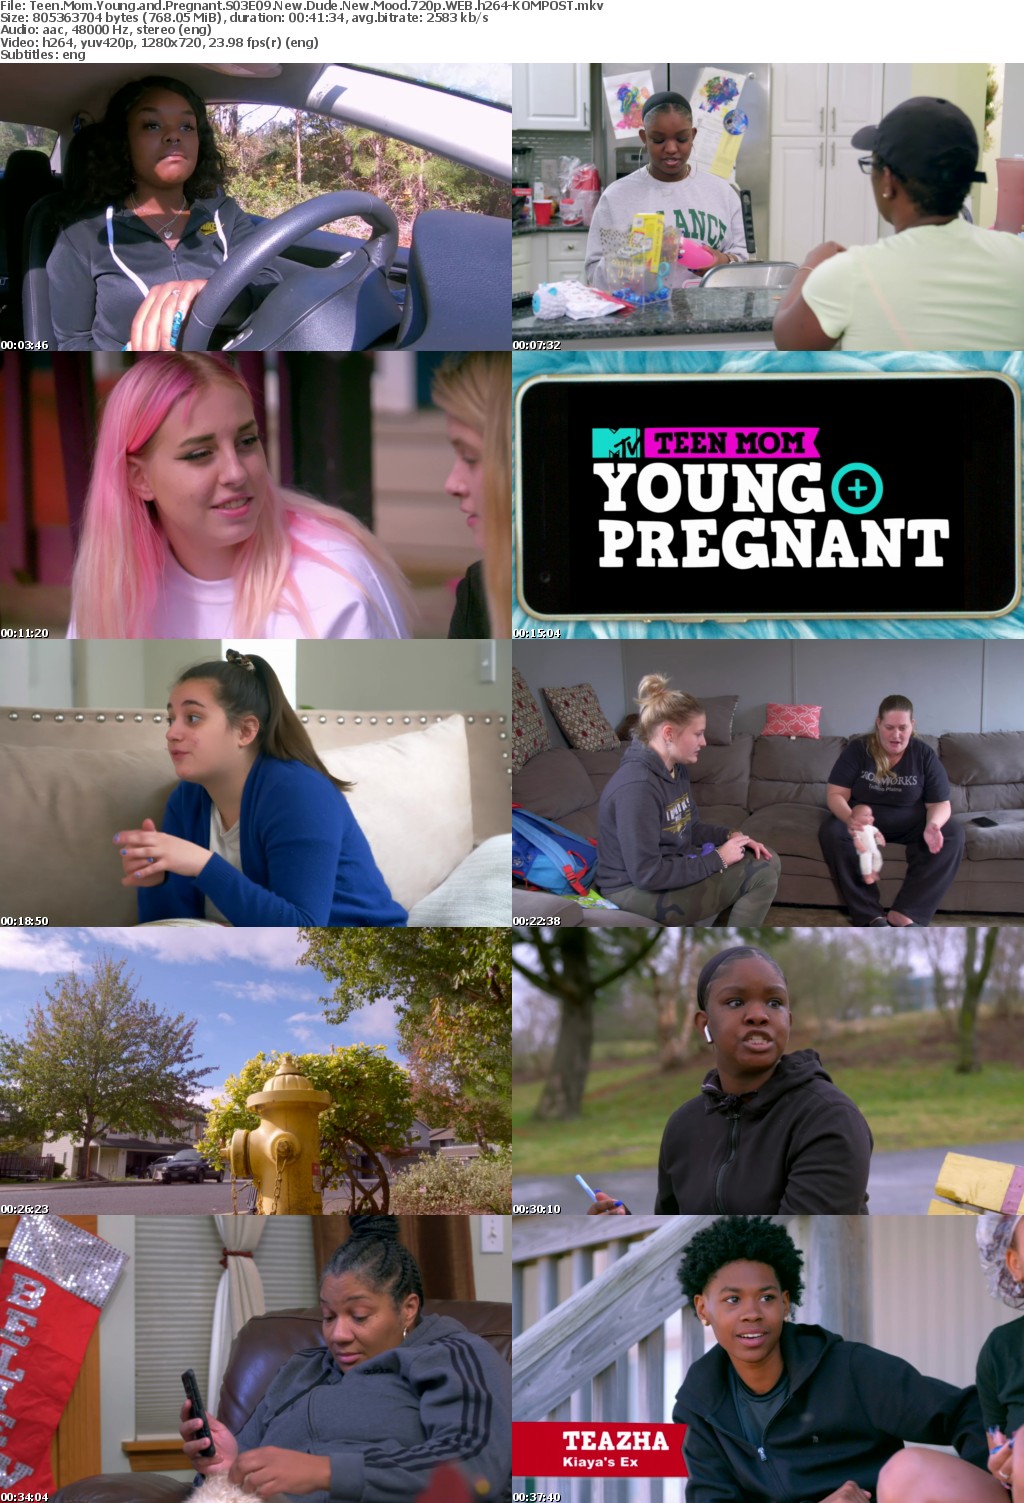 Teen Mom Young and Pregnant S03E09 New Dude New Mood 720p WEB h264-KOMPOST